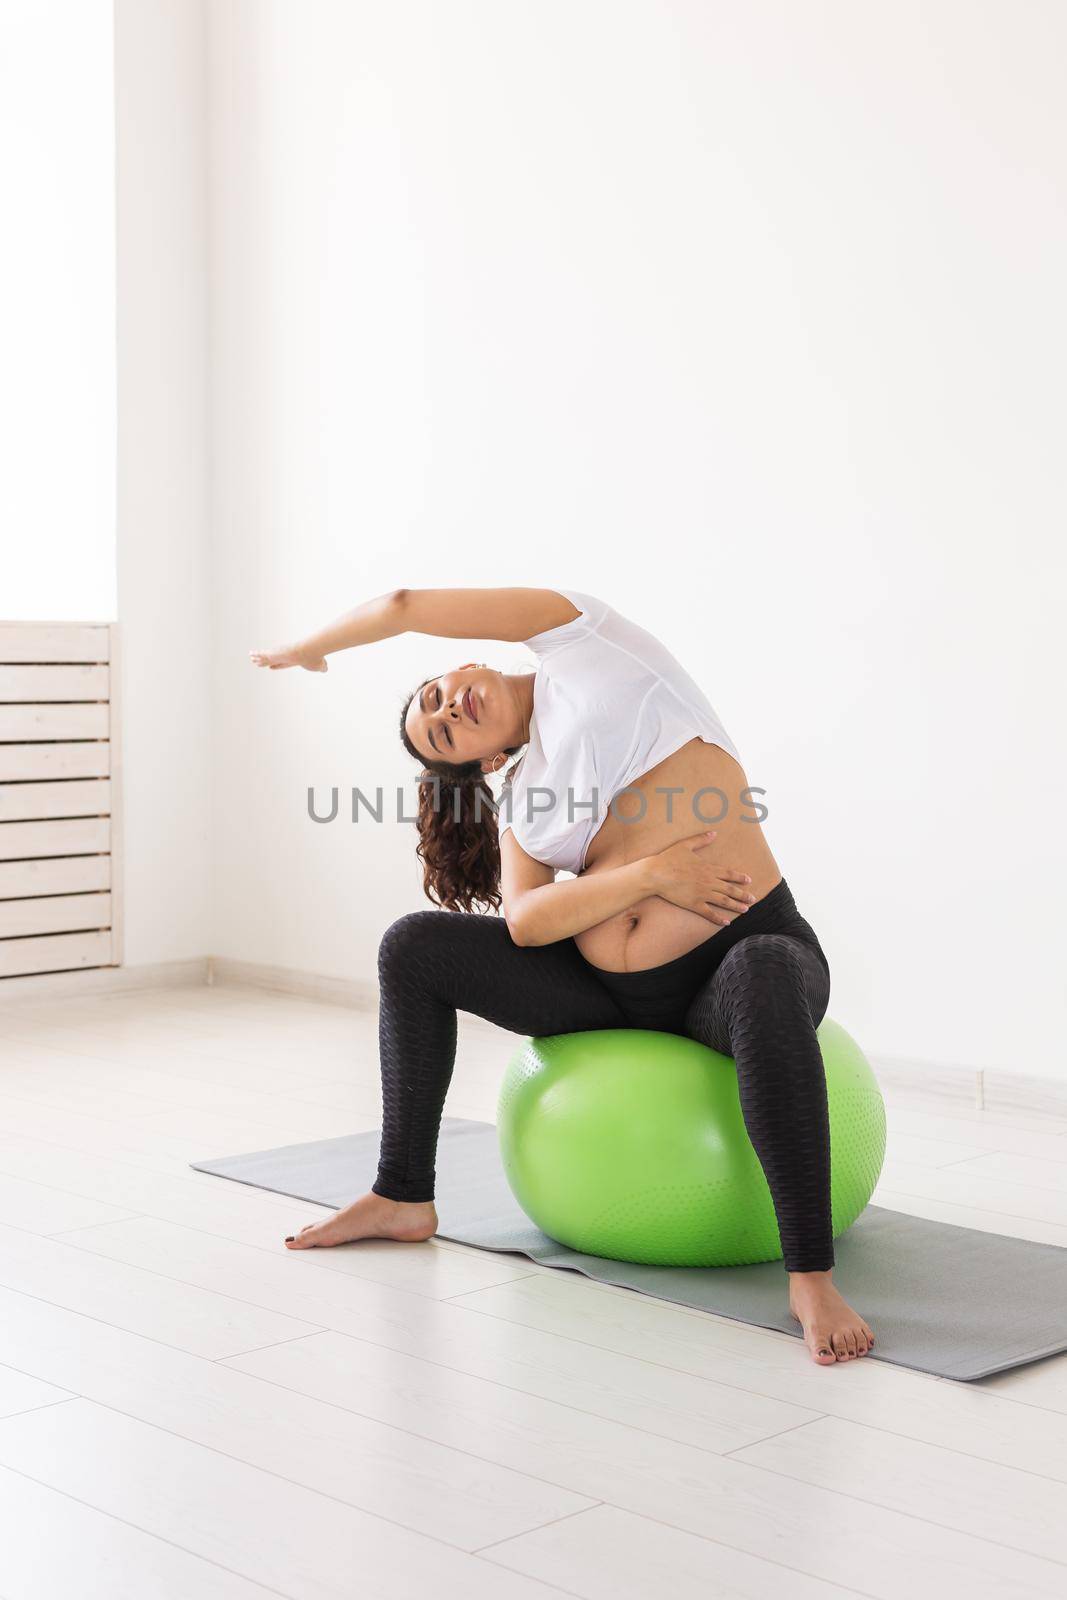 A young pregnant woman doing exercise using a fitness ball while sitting on a mat. by Satura86